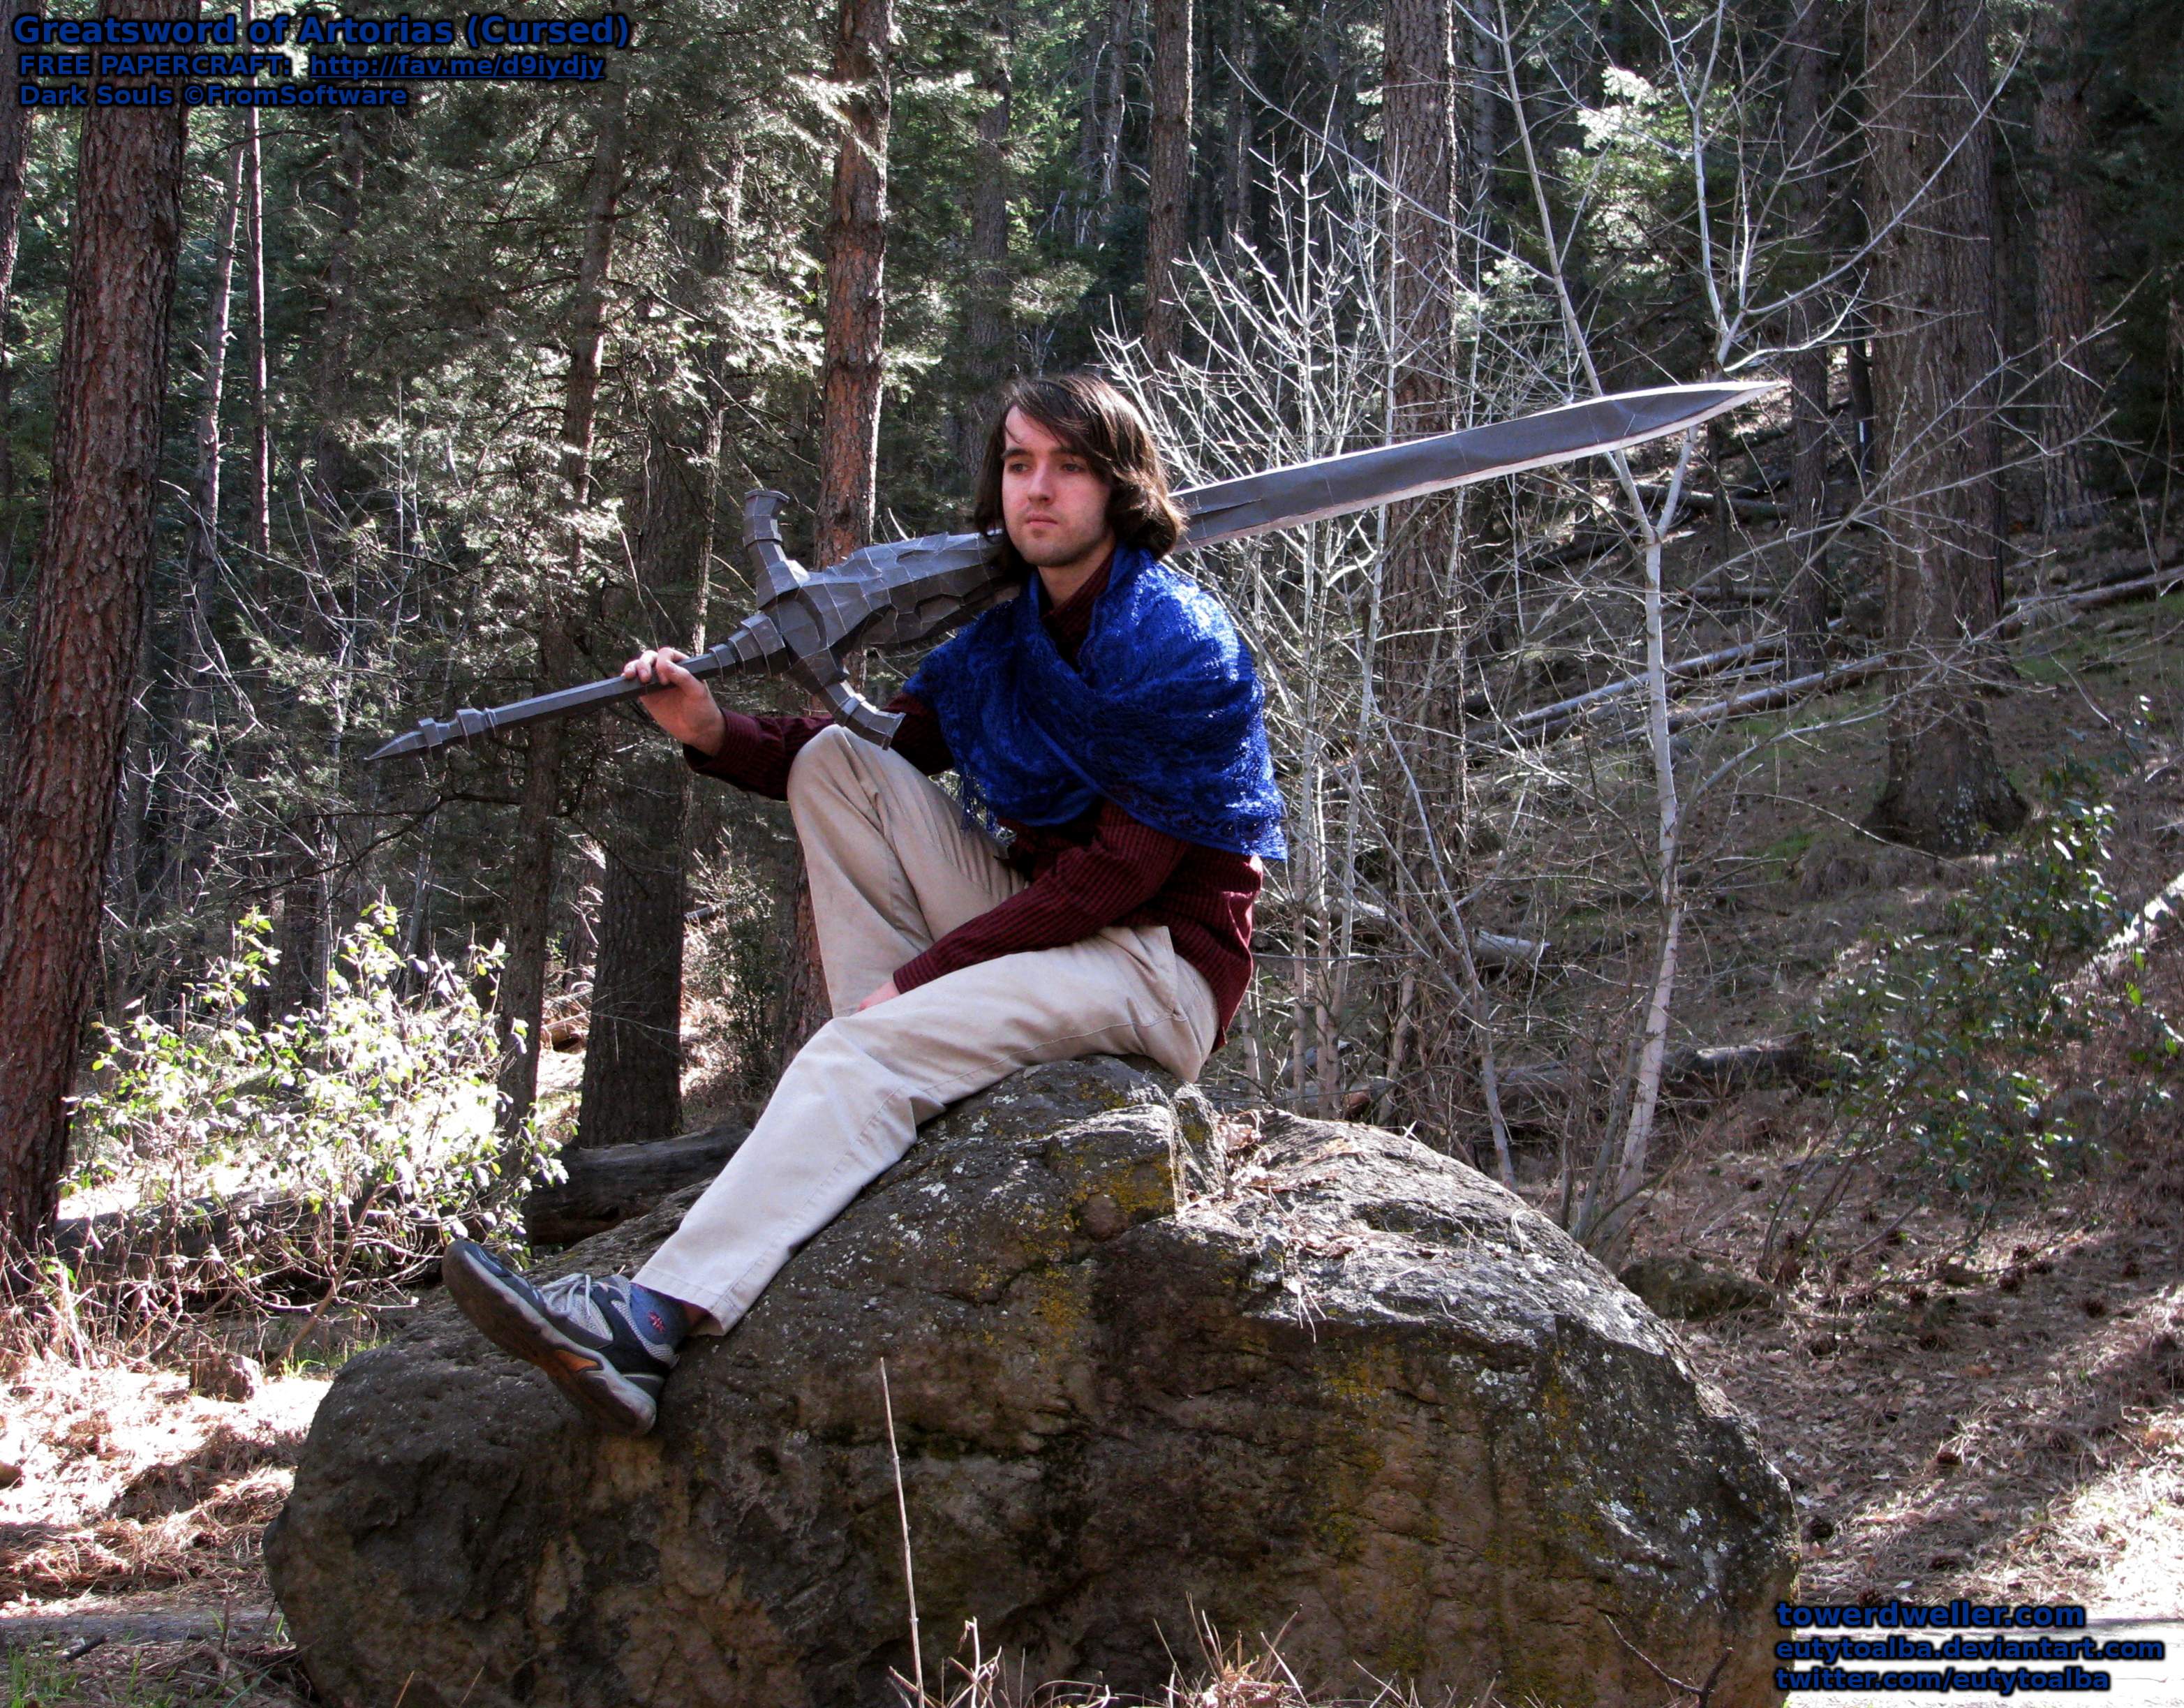 My meticulously scaled (accurately life-size!) Cursed Greatsword of Artorias papercraft, BEFORE fiberglass resin has been applied to it. (And held, in this case, by my brother.) In this pic, it's just "110lb" paper + a lightweight steel tomato plant stake, and probably still weighed under 1.5lbs. as a whole. Pic taken near Sedona, Arizona, USA, during a recent road trip.